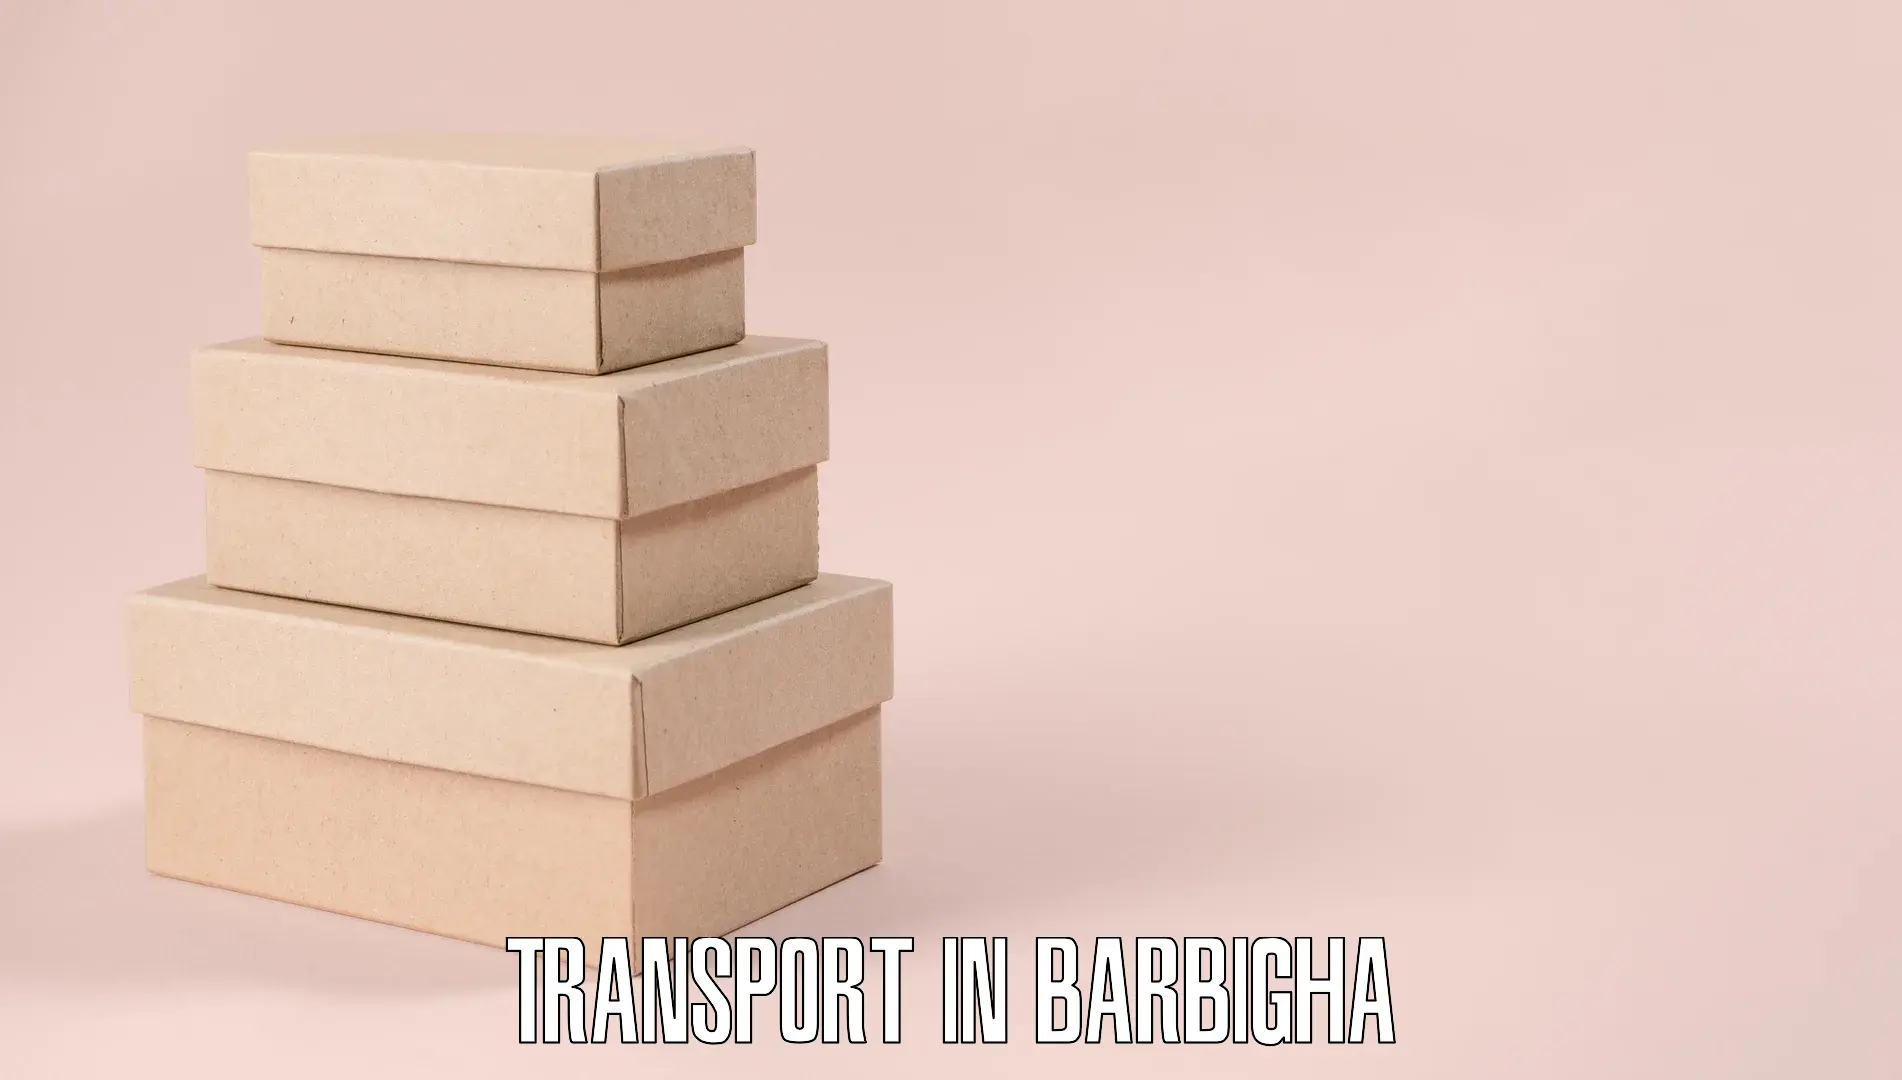 Cargo transport services in Barbigha